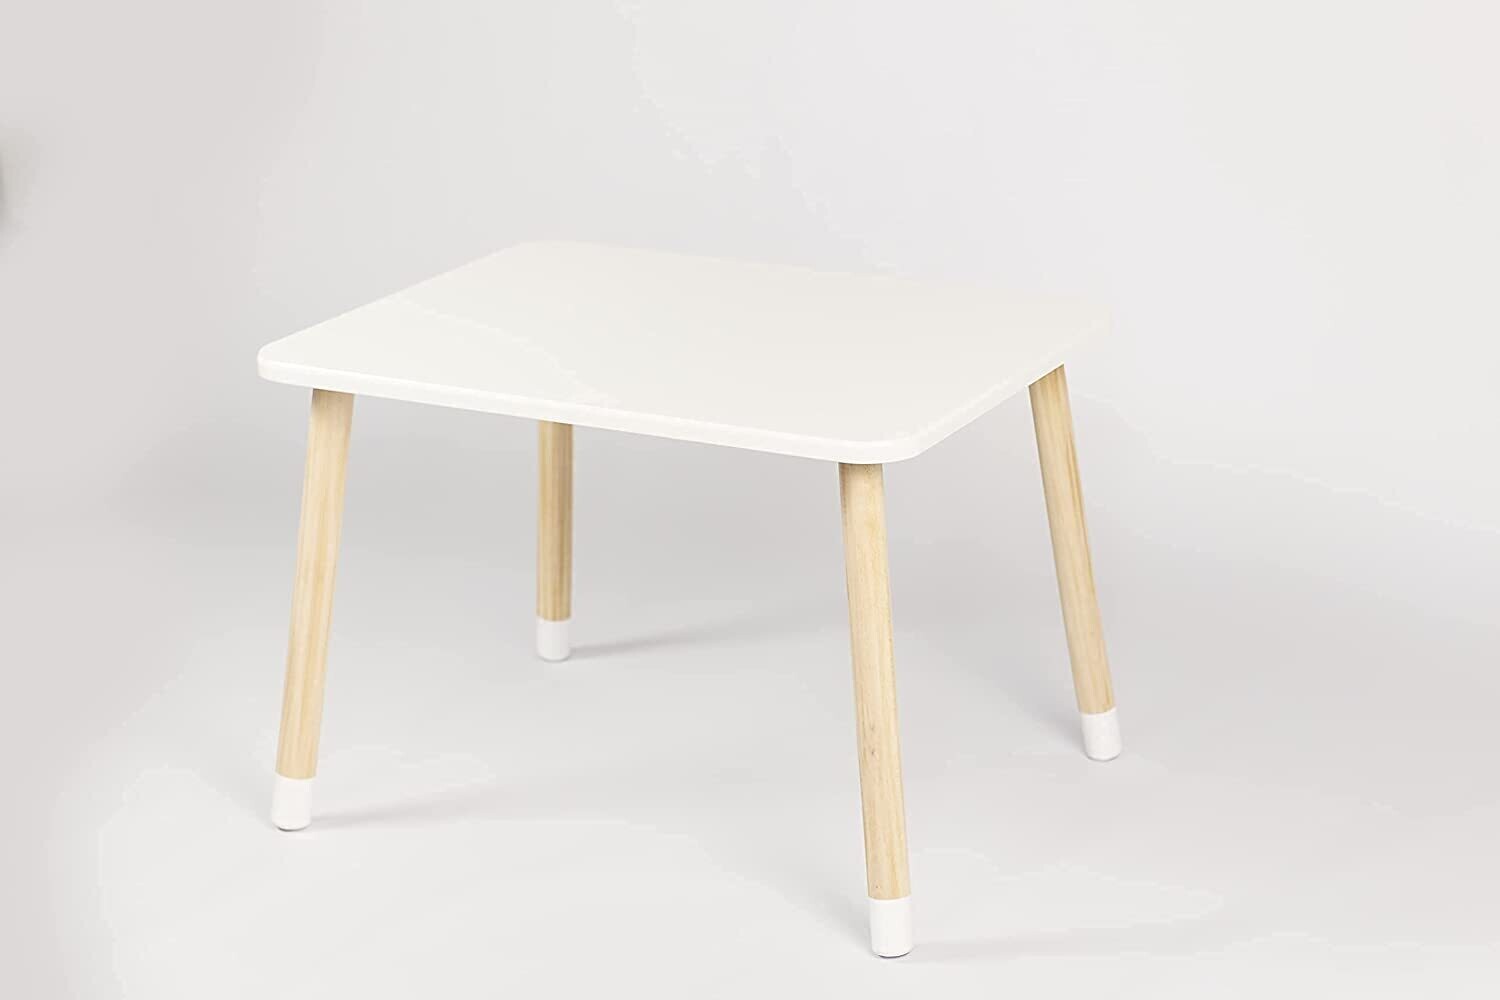 Children's wooden table with chairs